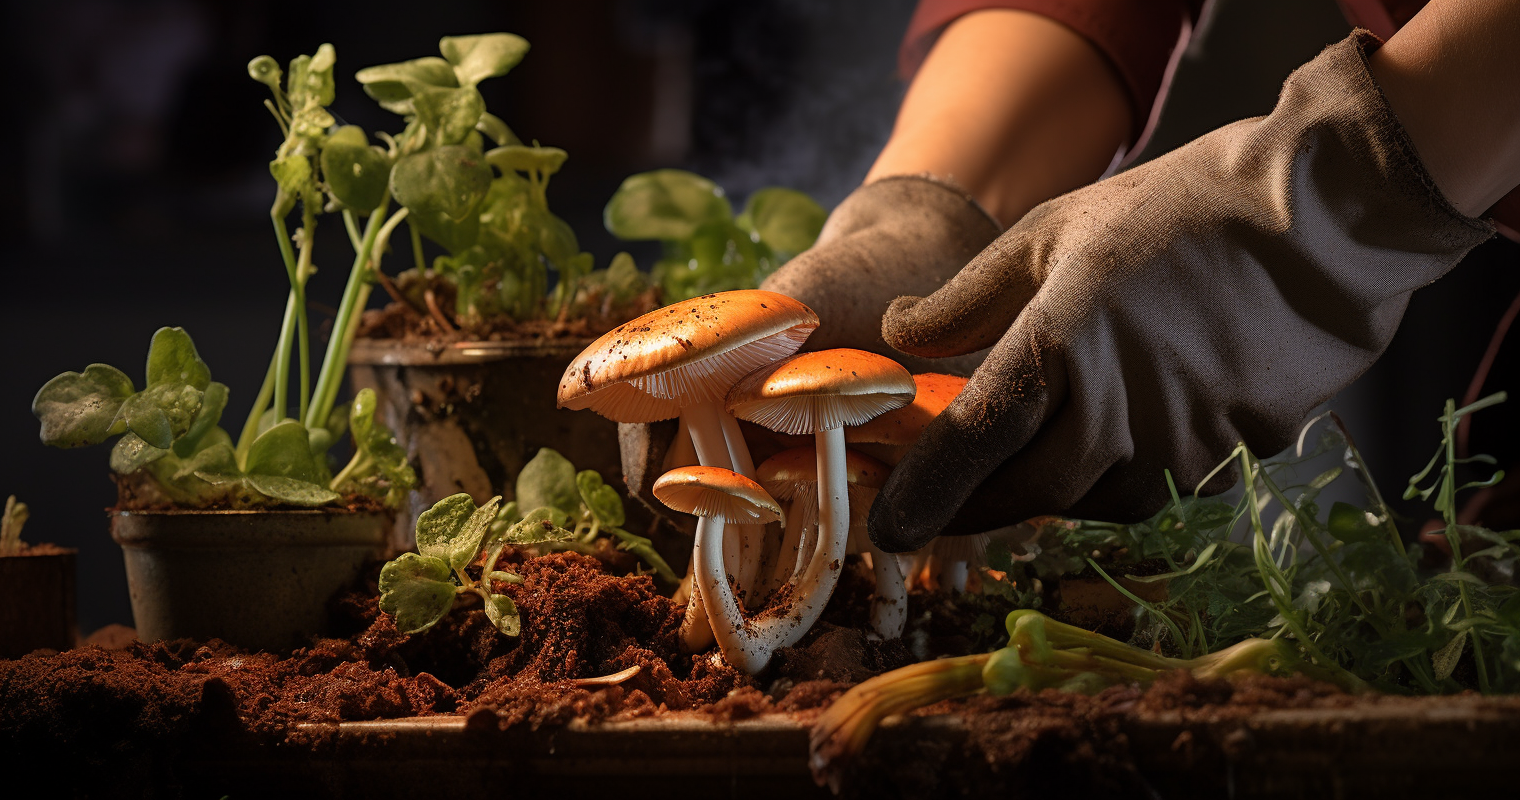 Hand removing mushrooms from a plant's soil